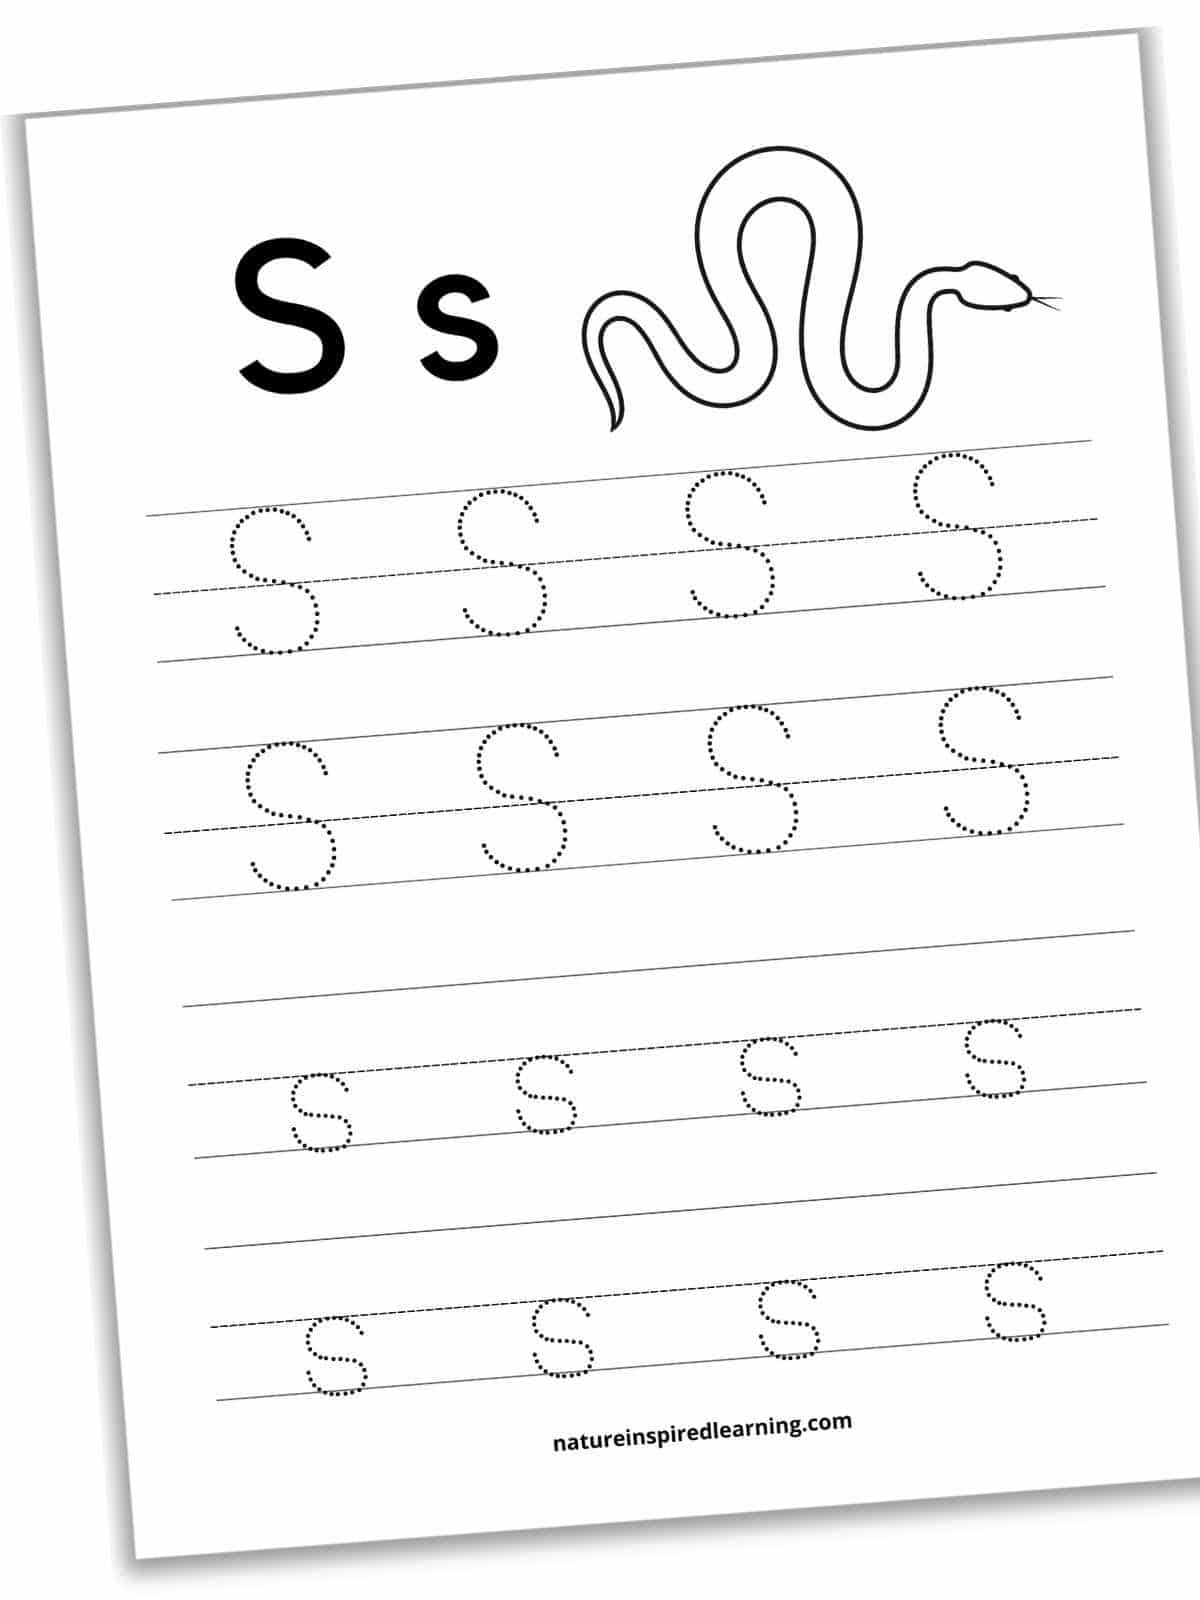 Worksheet with four set of lines with dotted S and s's with an outline of a snake at top.